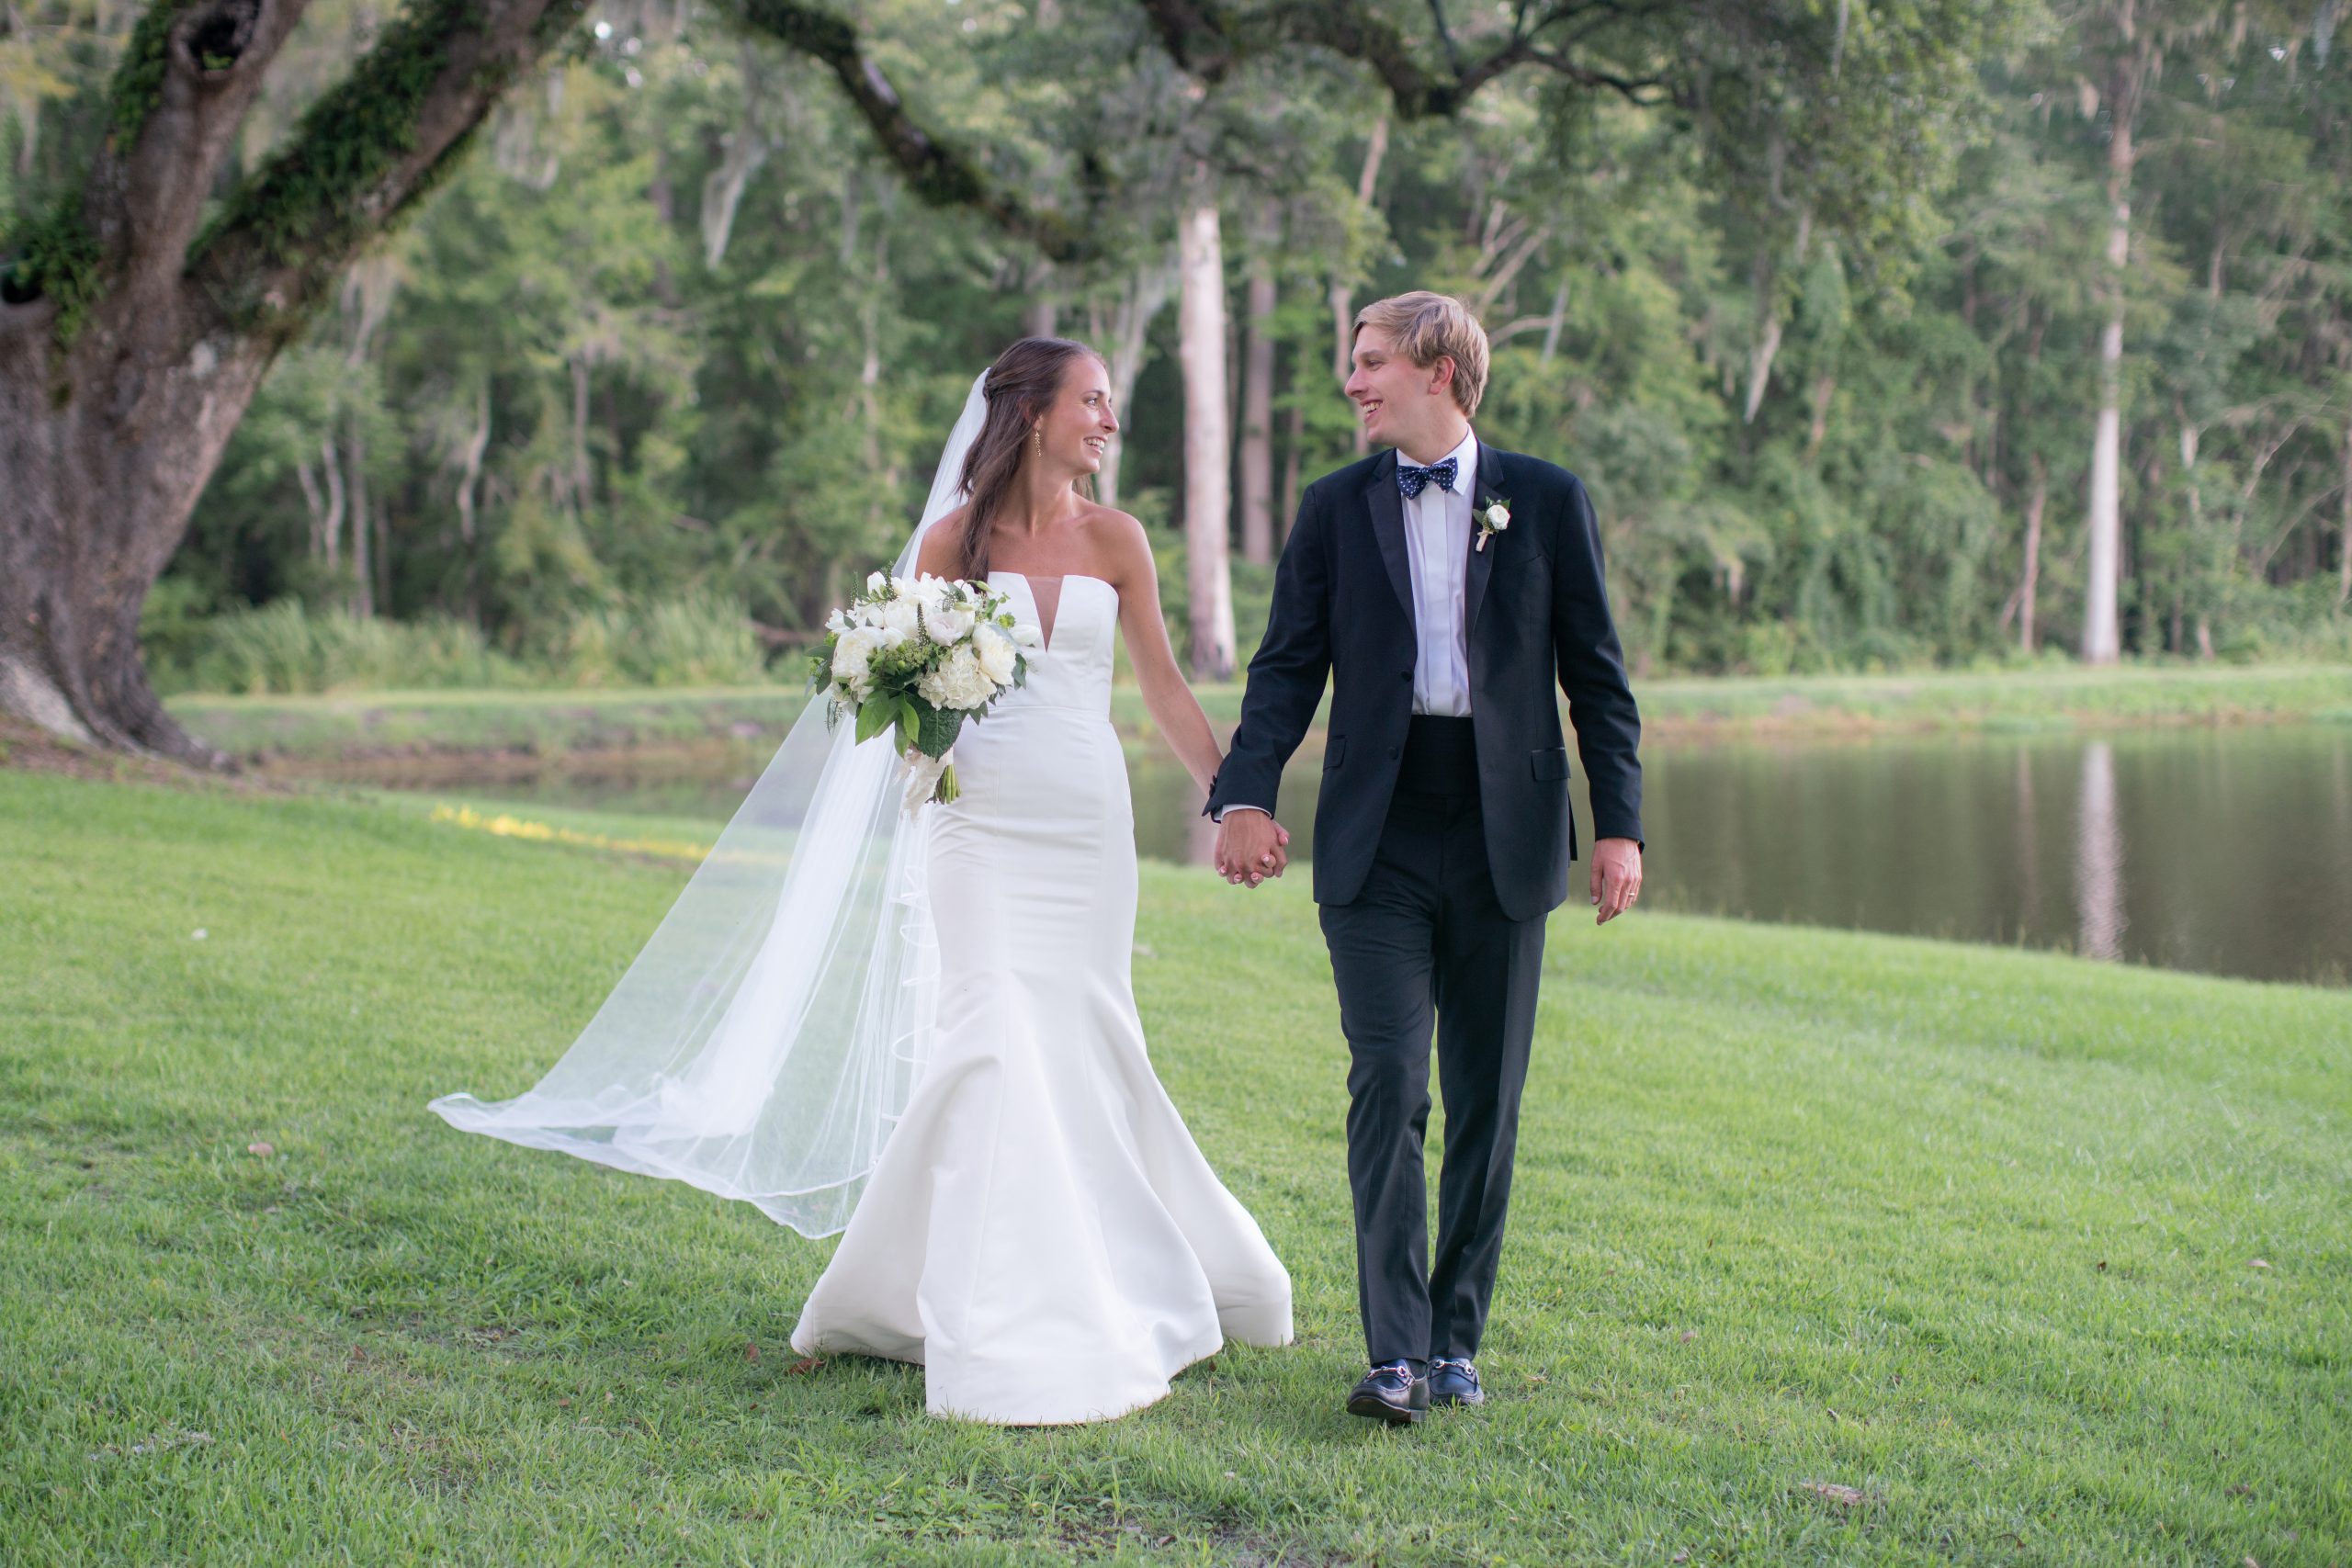 Emmy Ragsdale and Davis Kirby met through mutual friends their freshman year of college at the University of South Carolina. The couple was married Aug. 8 at Prince George Winyah Church in Georgetown with an outdoor reception at the Ragsdales’ country property on the banks of the Great Pee Dee River.